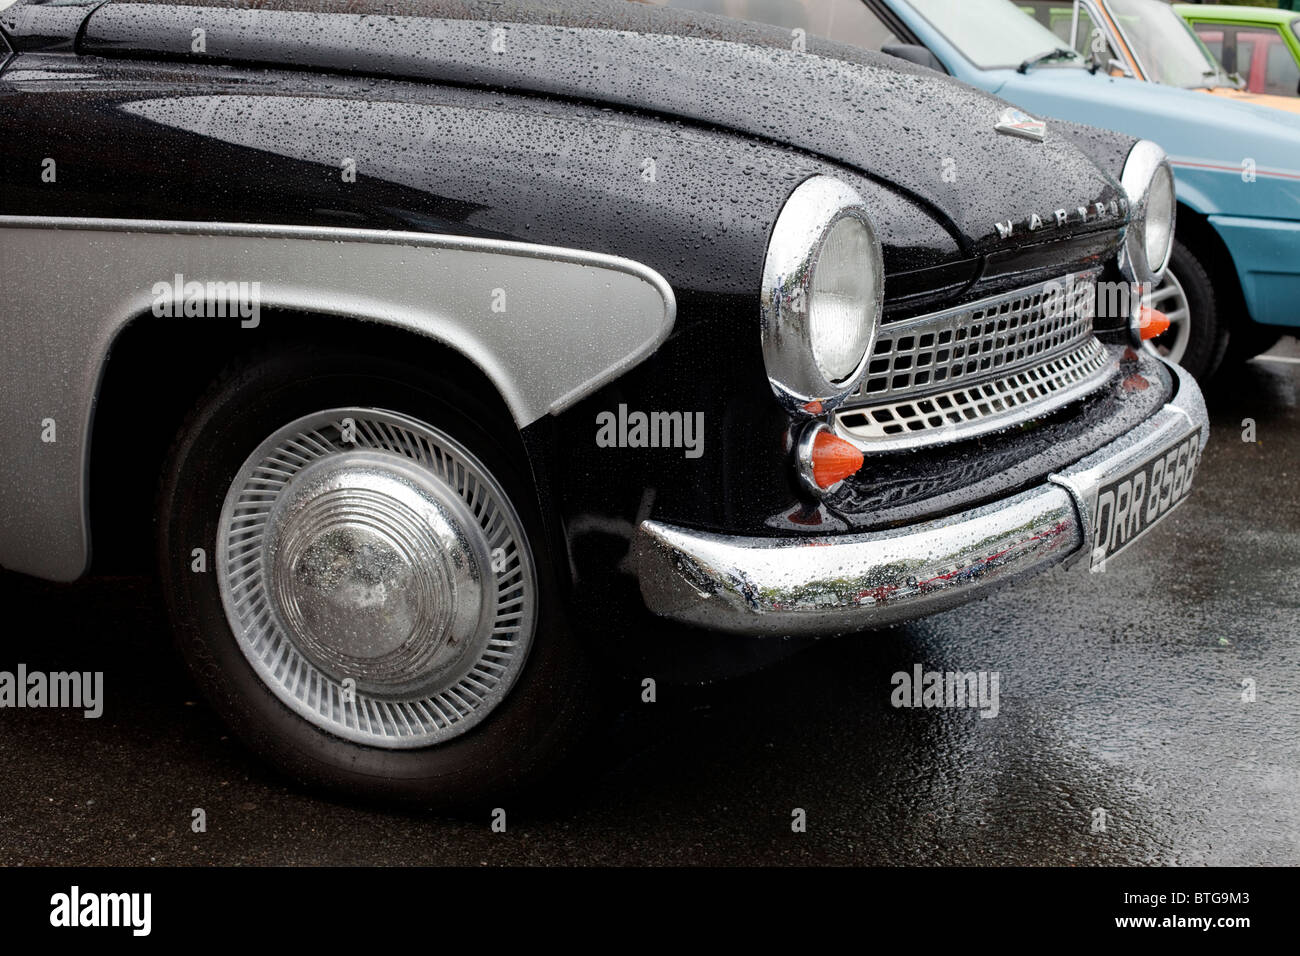 A 1963 Wartburg on display at an East European Car Rally in Stoke-On-Trent, UK Stock Photo